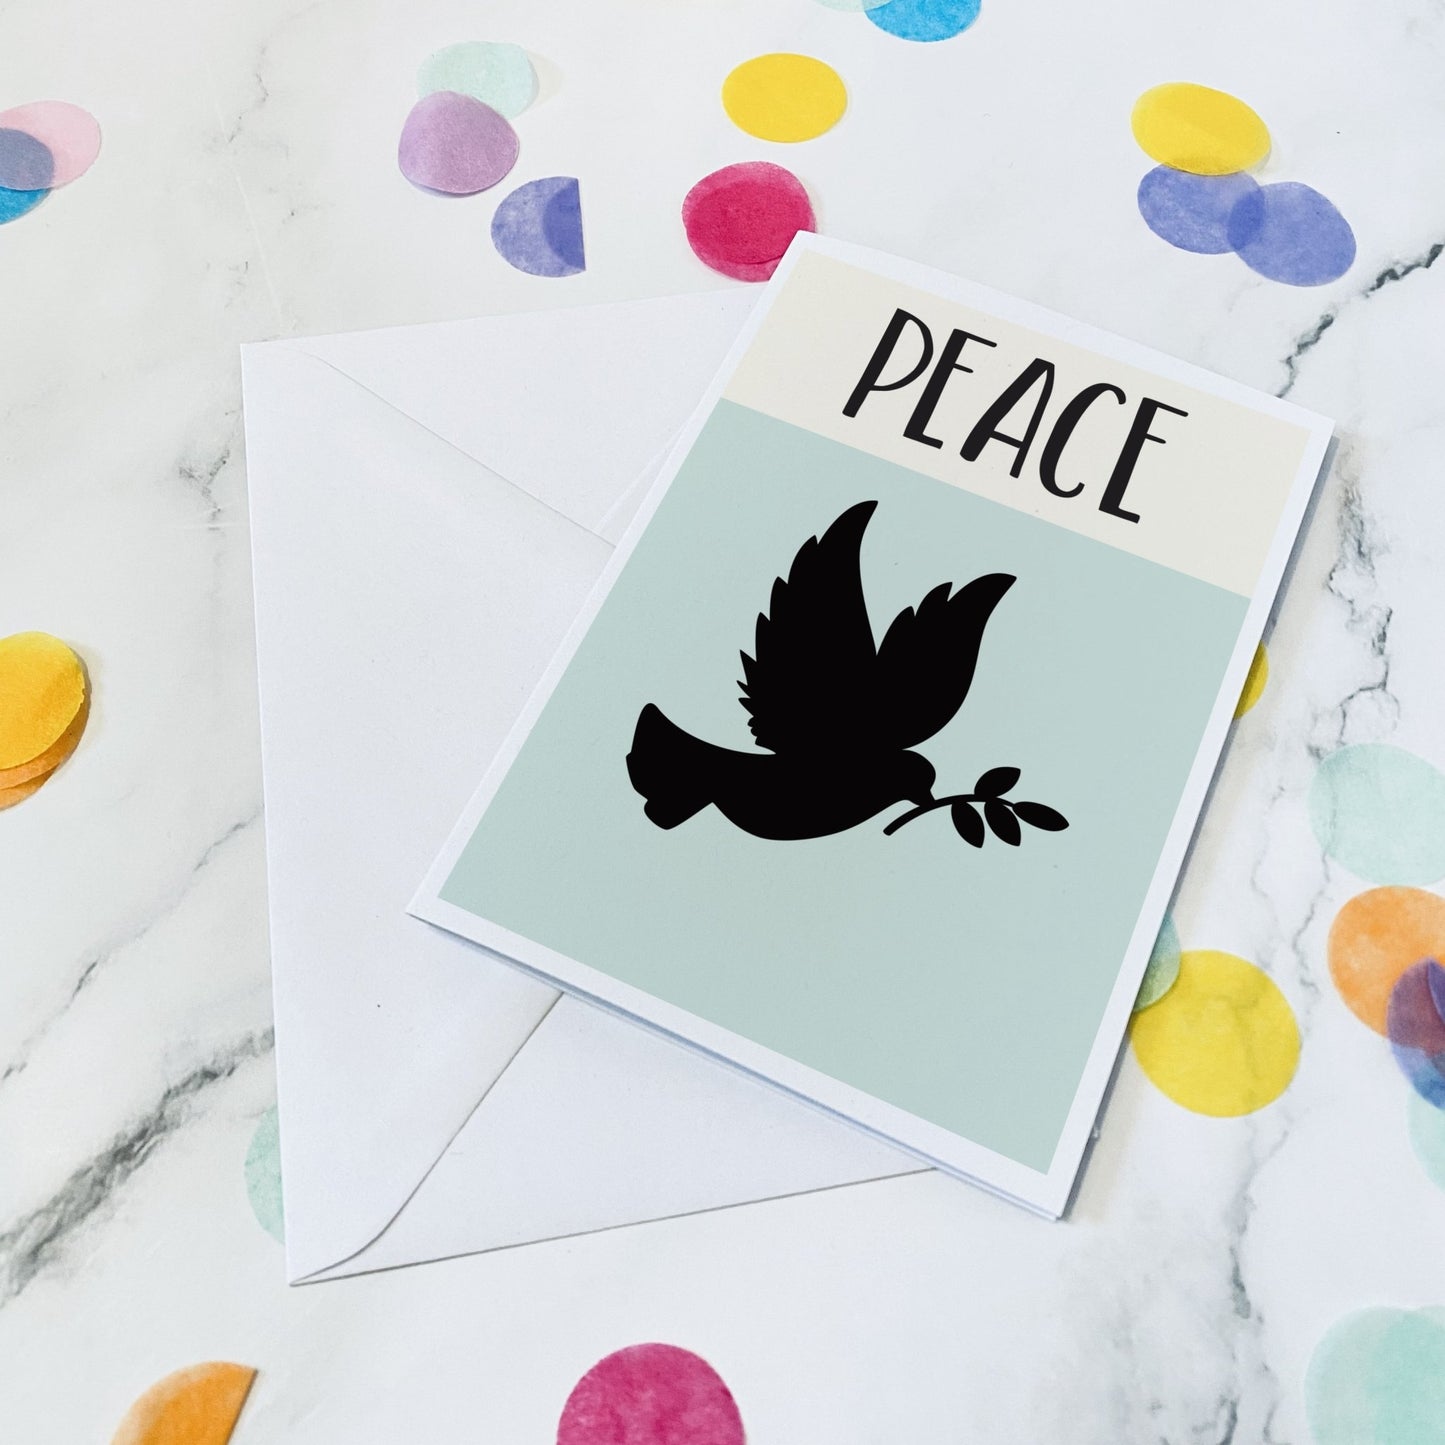 Peace Nativity scene christmas card - Dolly and Fred Designs